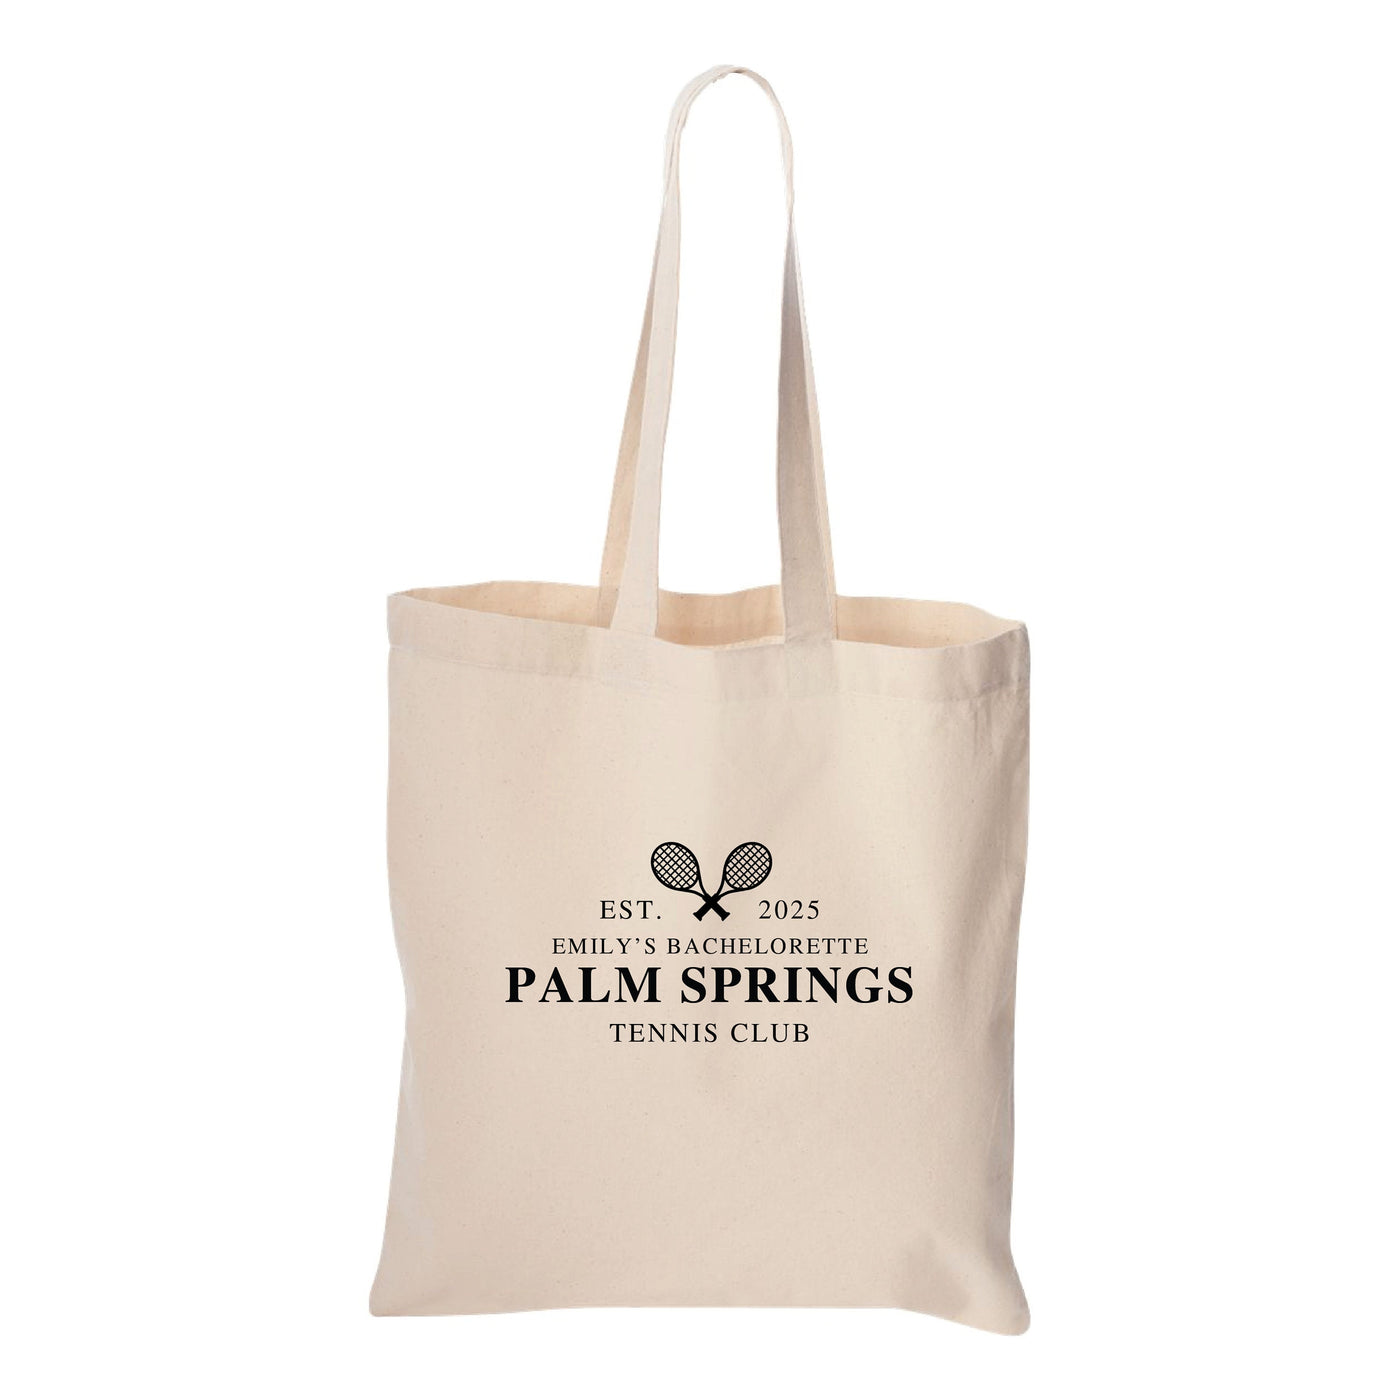 a tote bag with the palm springs tennis club logo on it